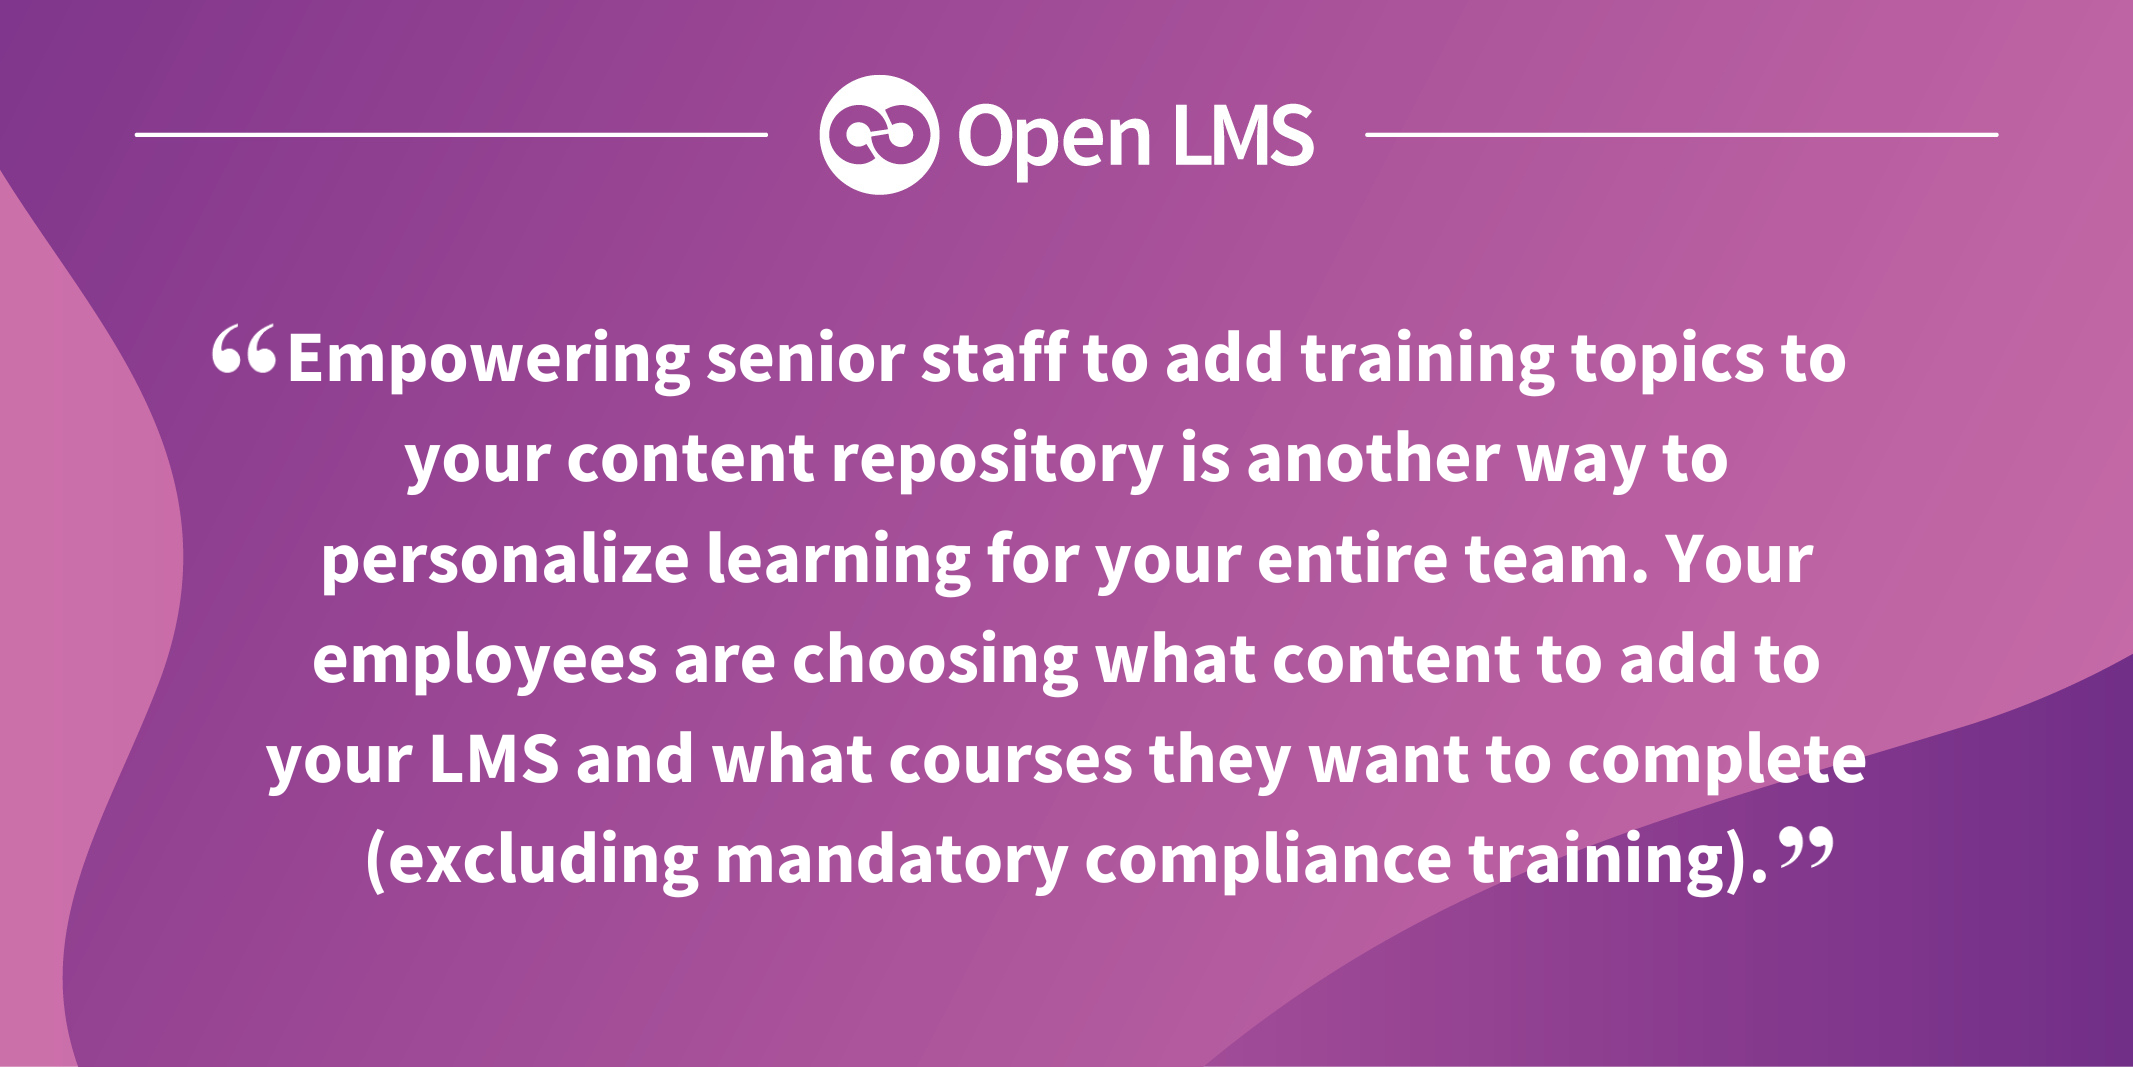 Empowering senior staff to add training topics to your content repository is another way to personalize learning for your entire team. Your employees are choosing what content to add to your LMS and what courses they want to complete (excluding mandatory compliance training).